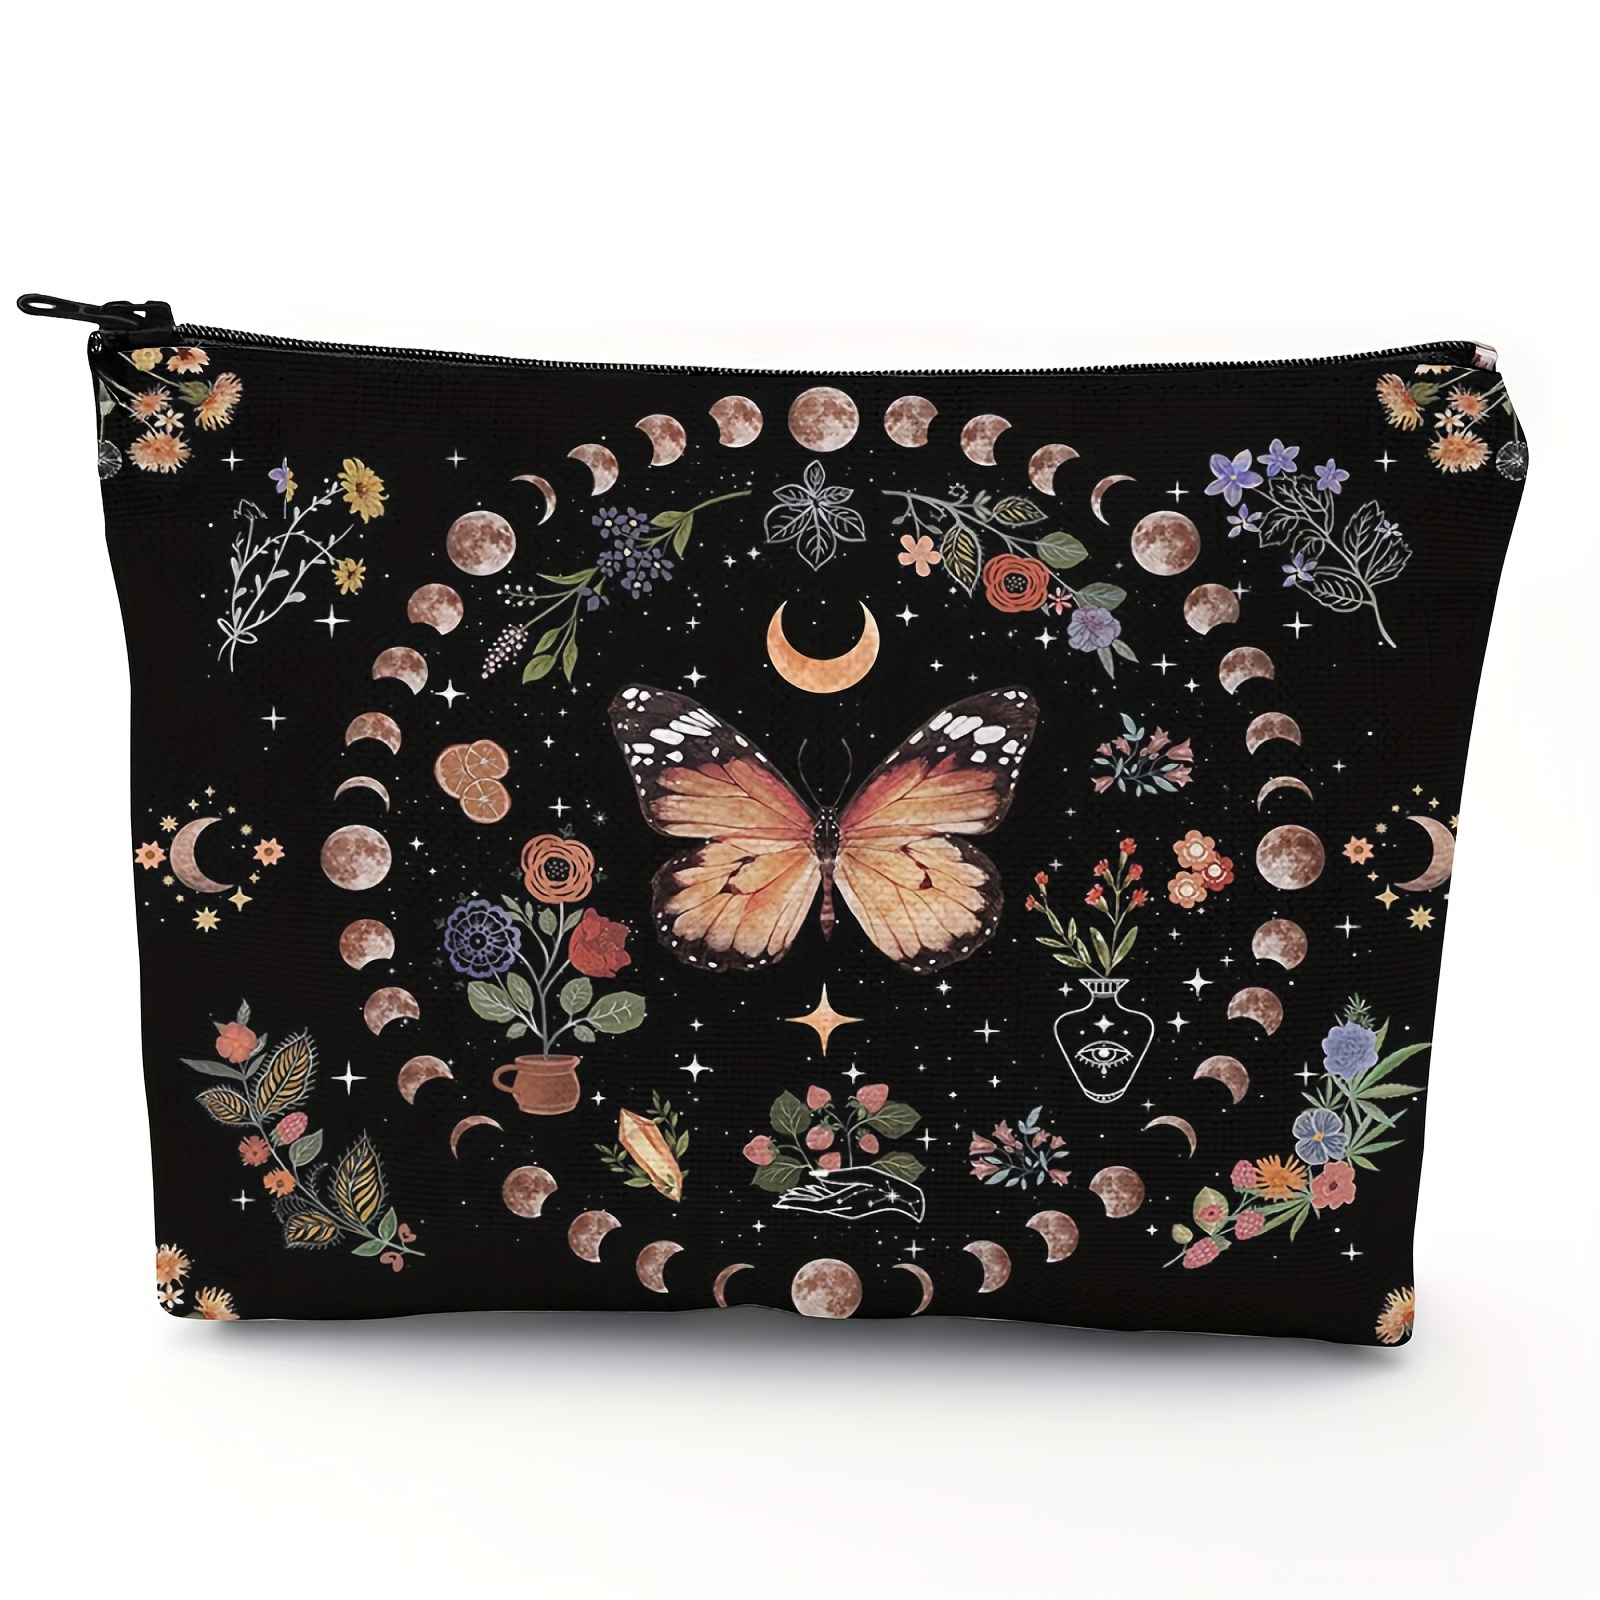 

Butterfly Moon Flower Makeup Bag Zipper Pouch, Polyester Cosmetic Travel Bag, Toiletry Case Multi Functional Pouch Gifts For Friends